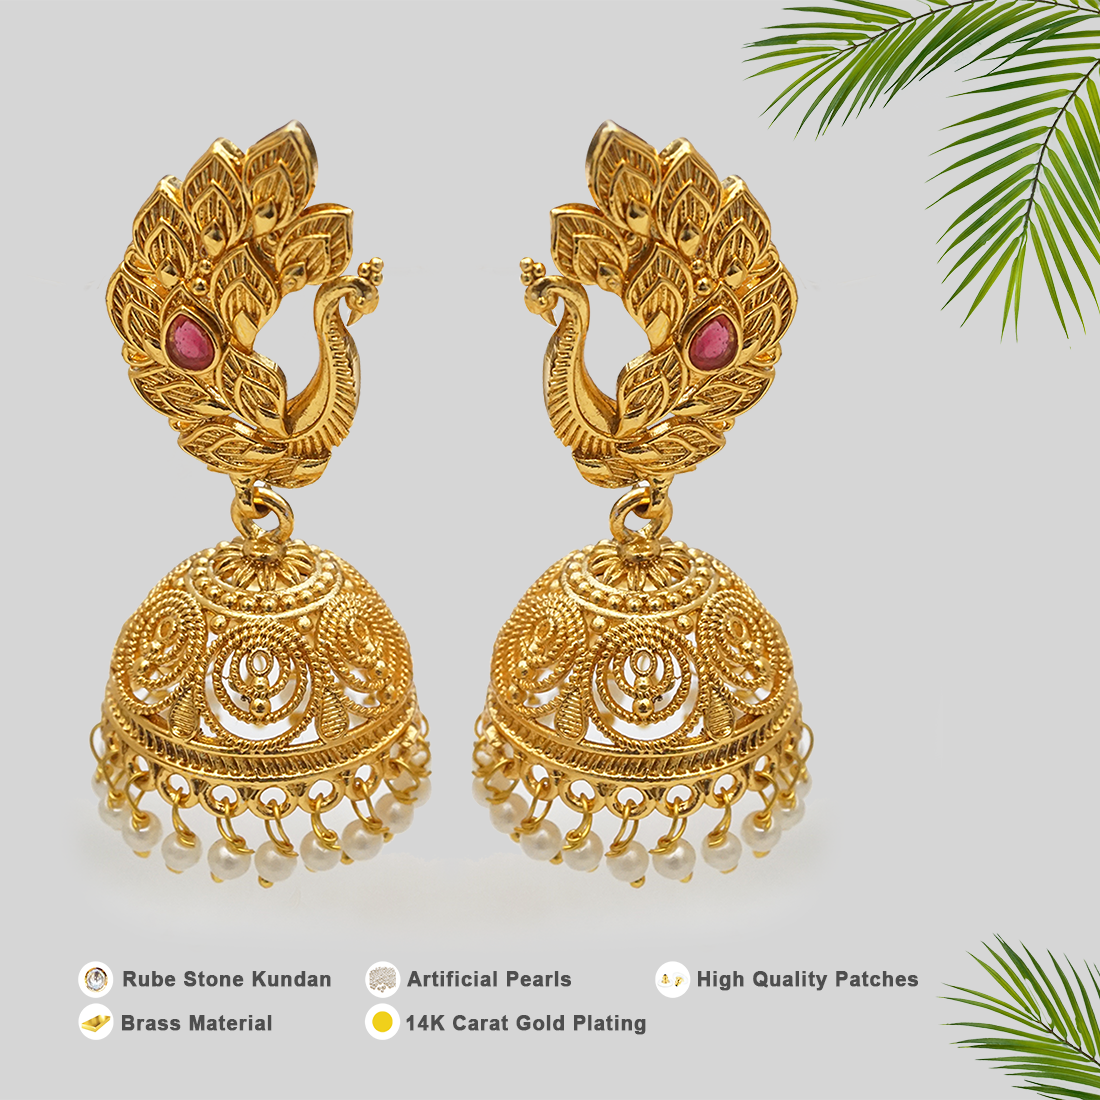 Peacock design luxury of our premium quality earrings – Look Ethnic